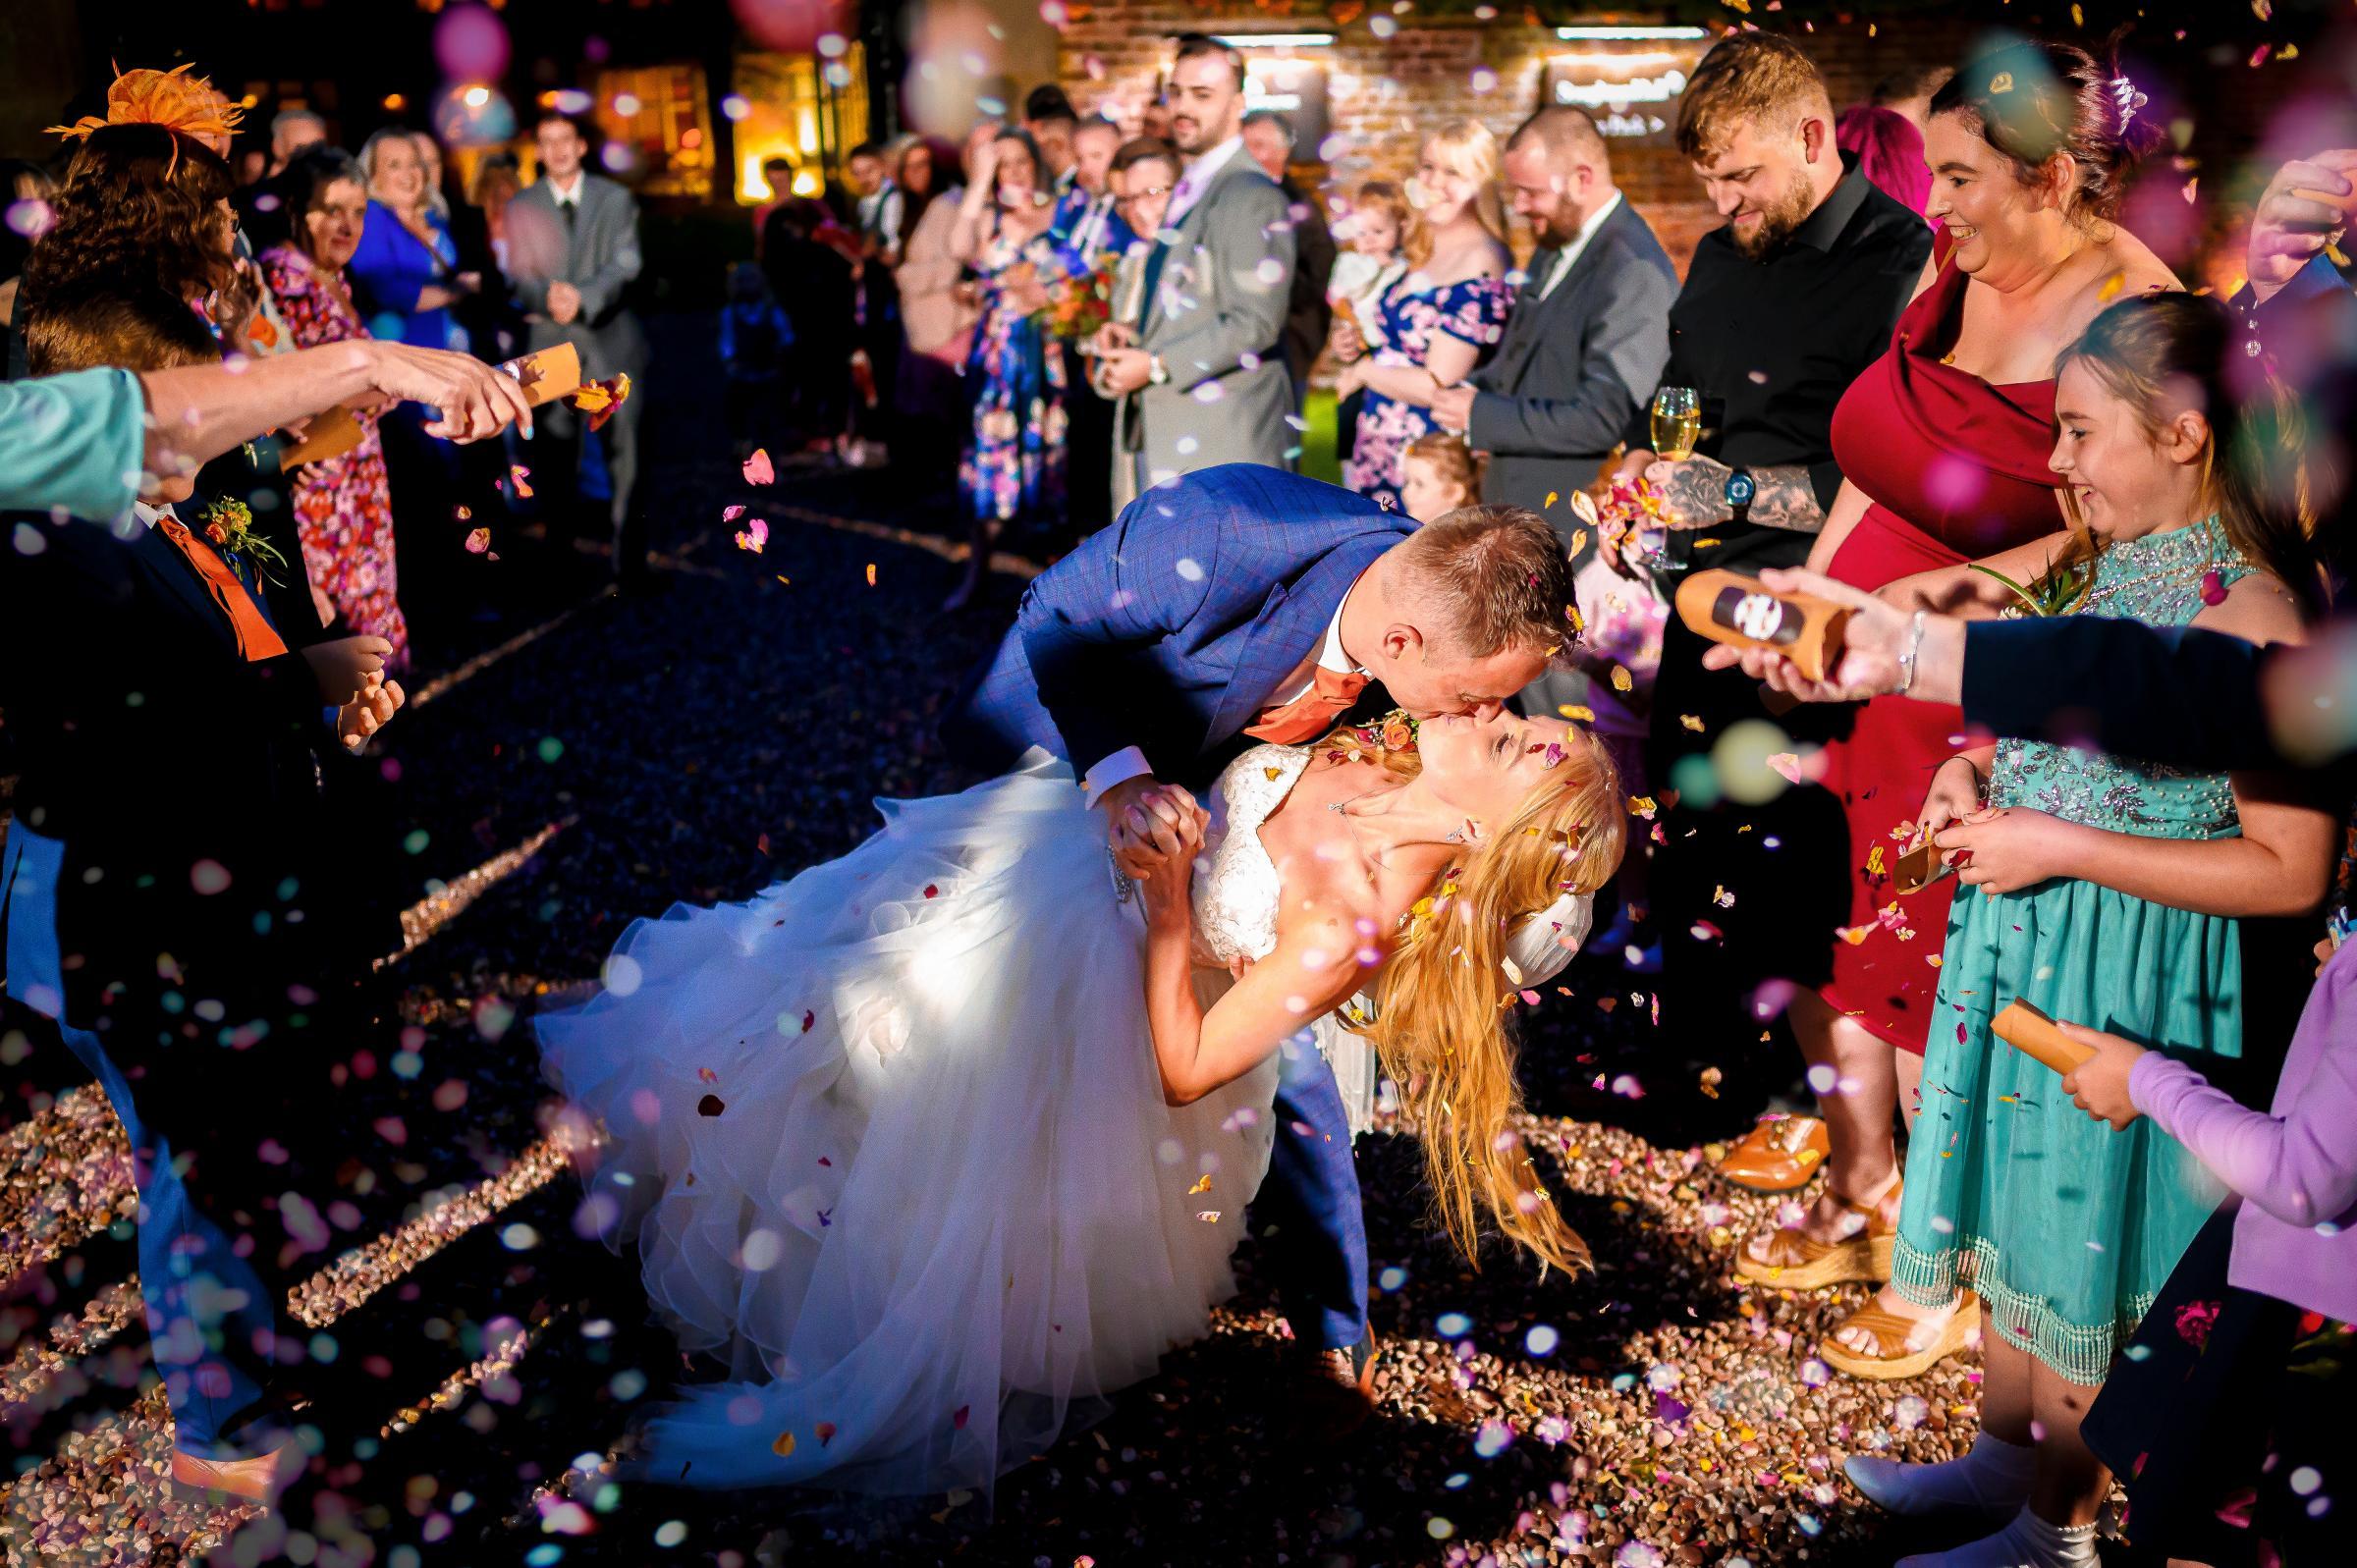 It rained all day but managed to stop when it got dark. Photographer Joe managed to capture every single bit of colour for this confetti shot.